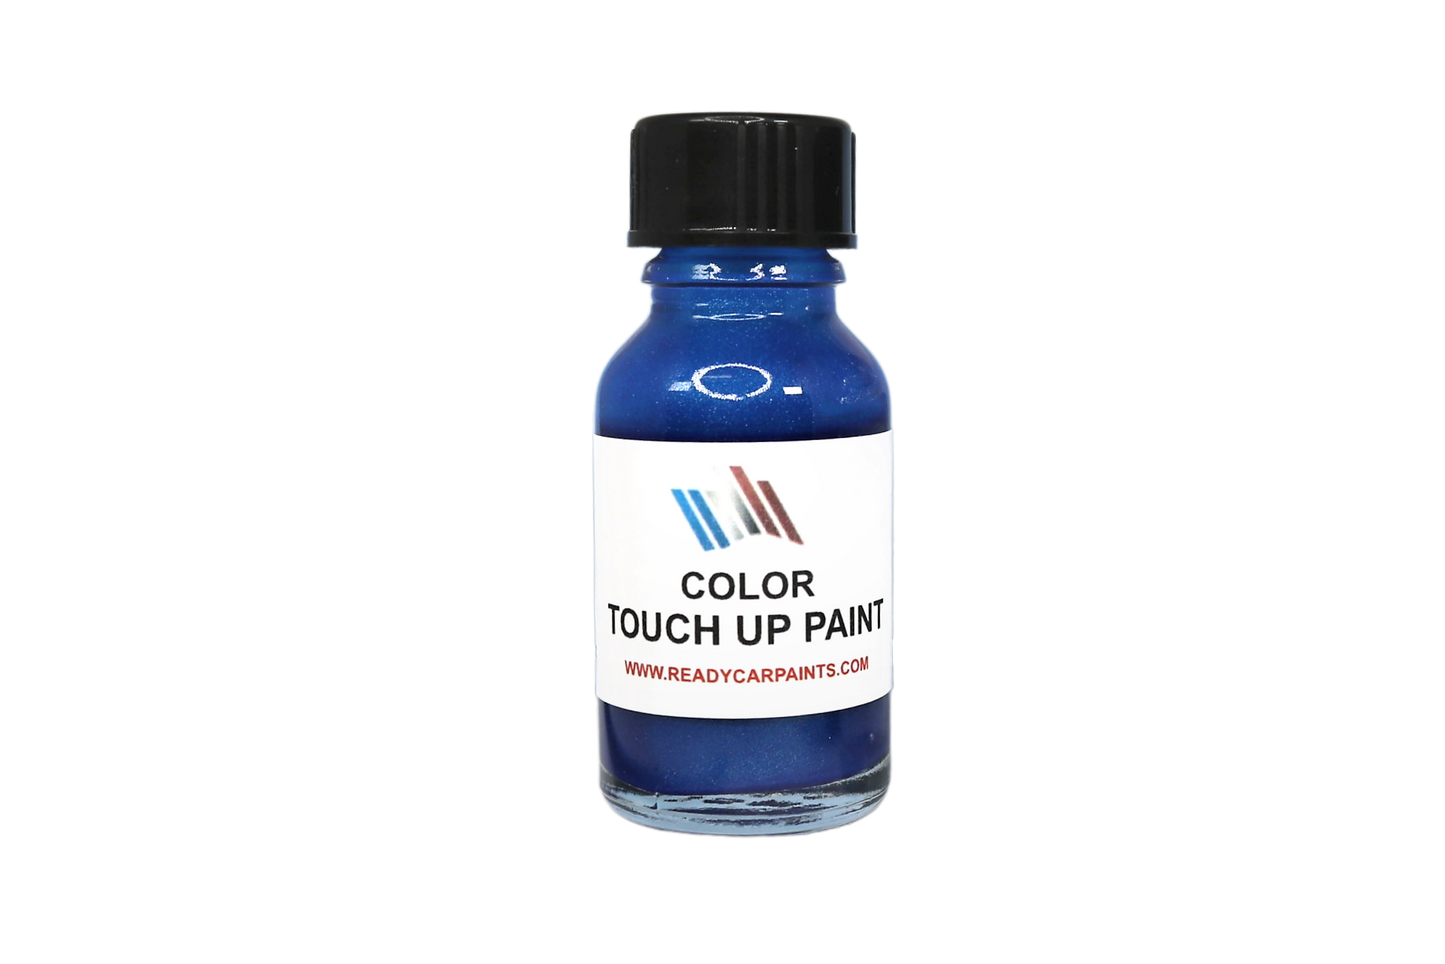 AUDI LY7R/4J Crystal Blue Metallic Touch Up Paint Kit 100% OEM Color Match